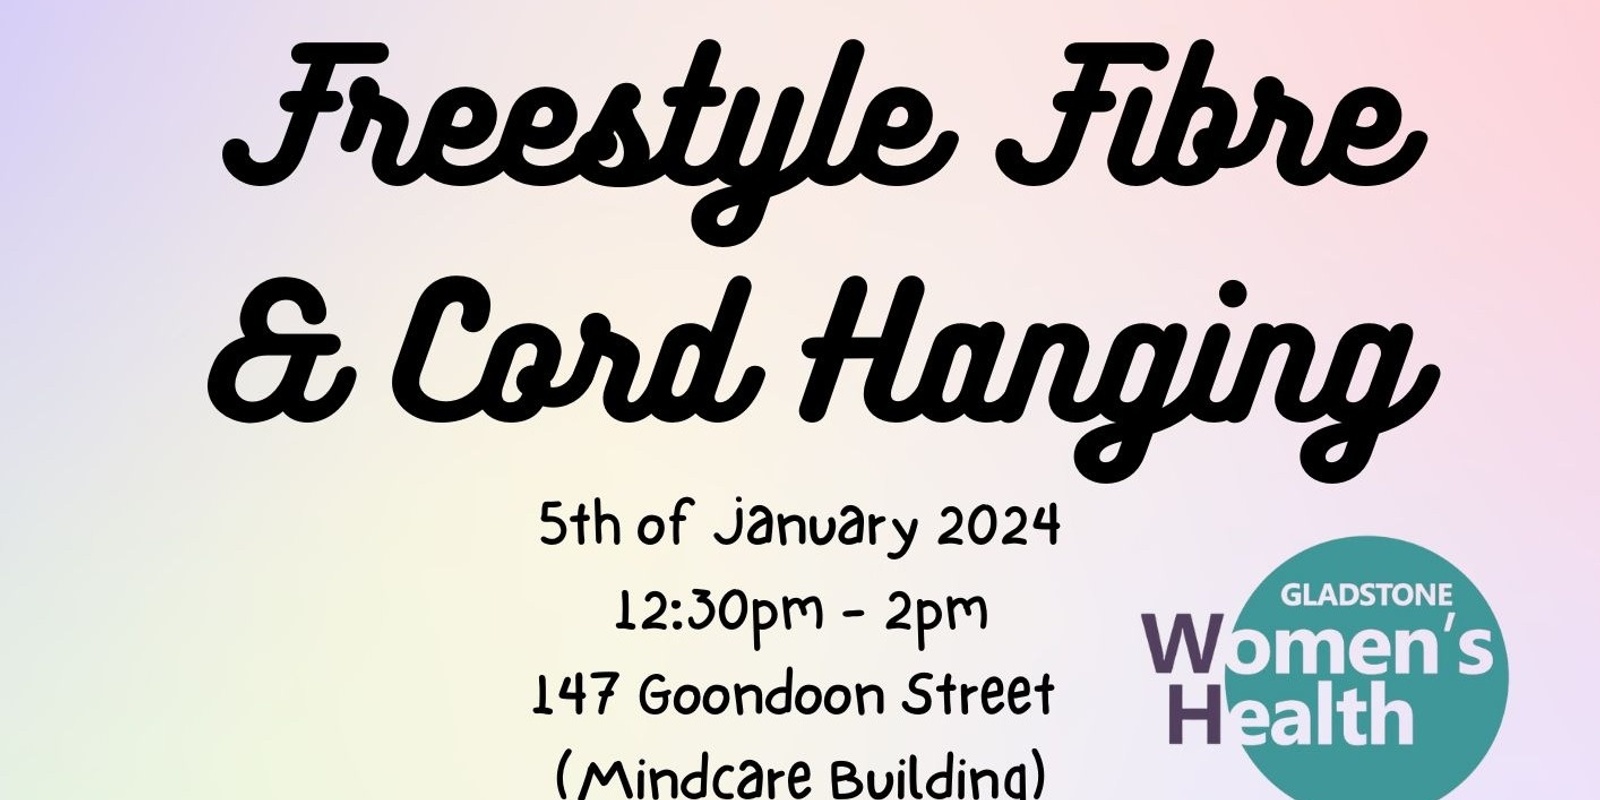 Banner image for Freestyle Fibre & cord wall hanging 